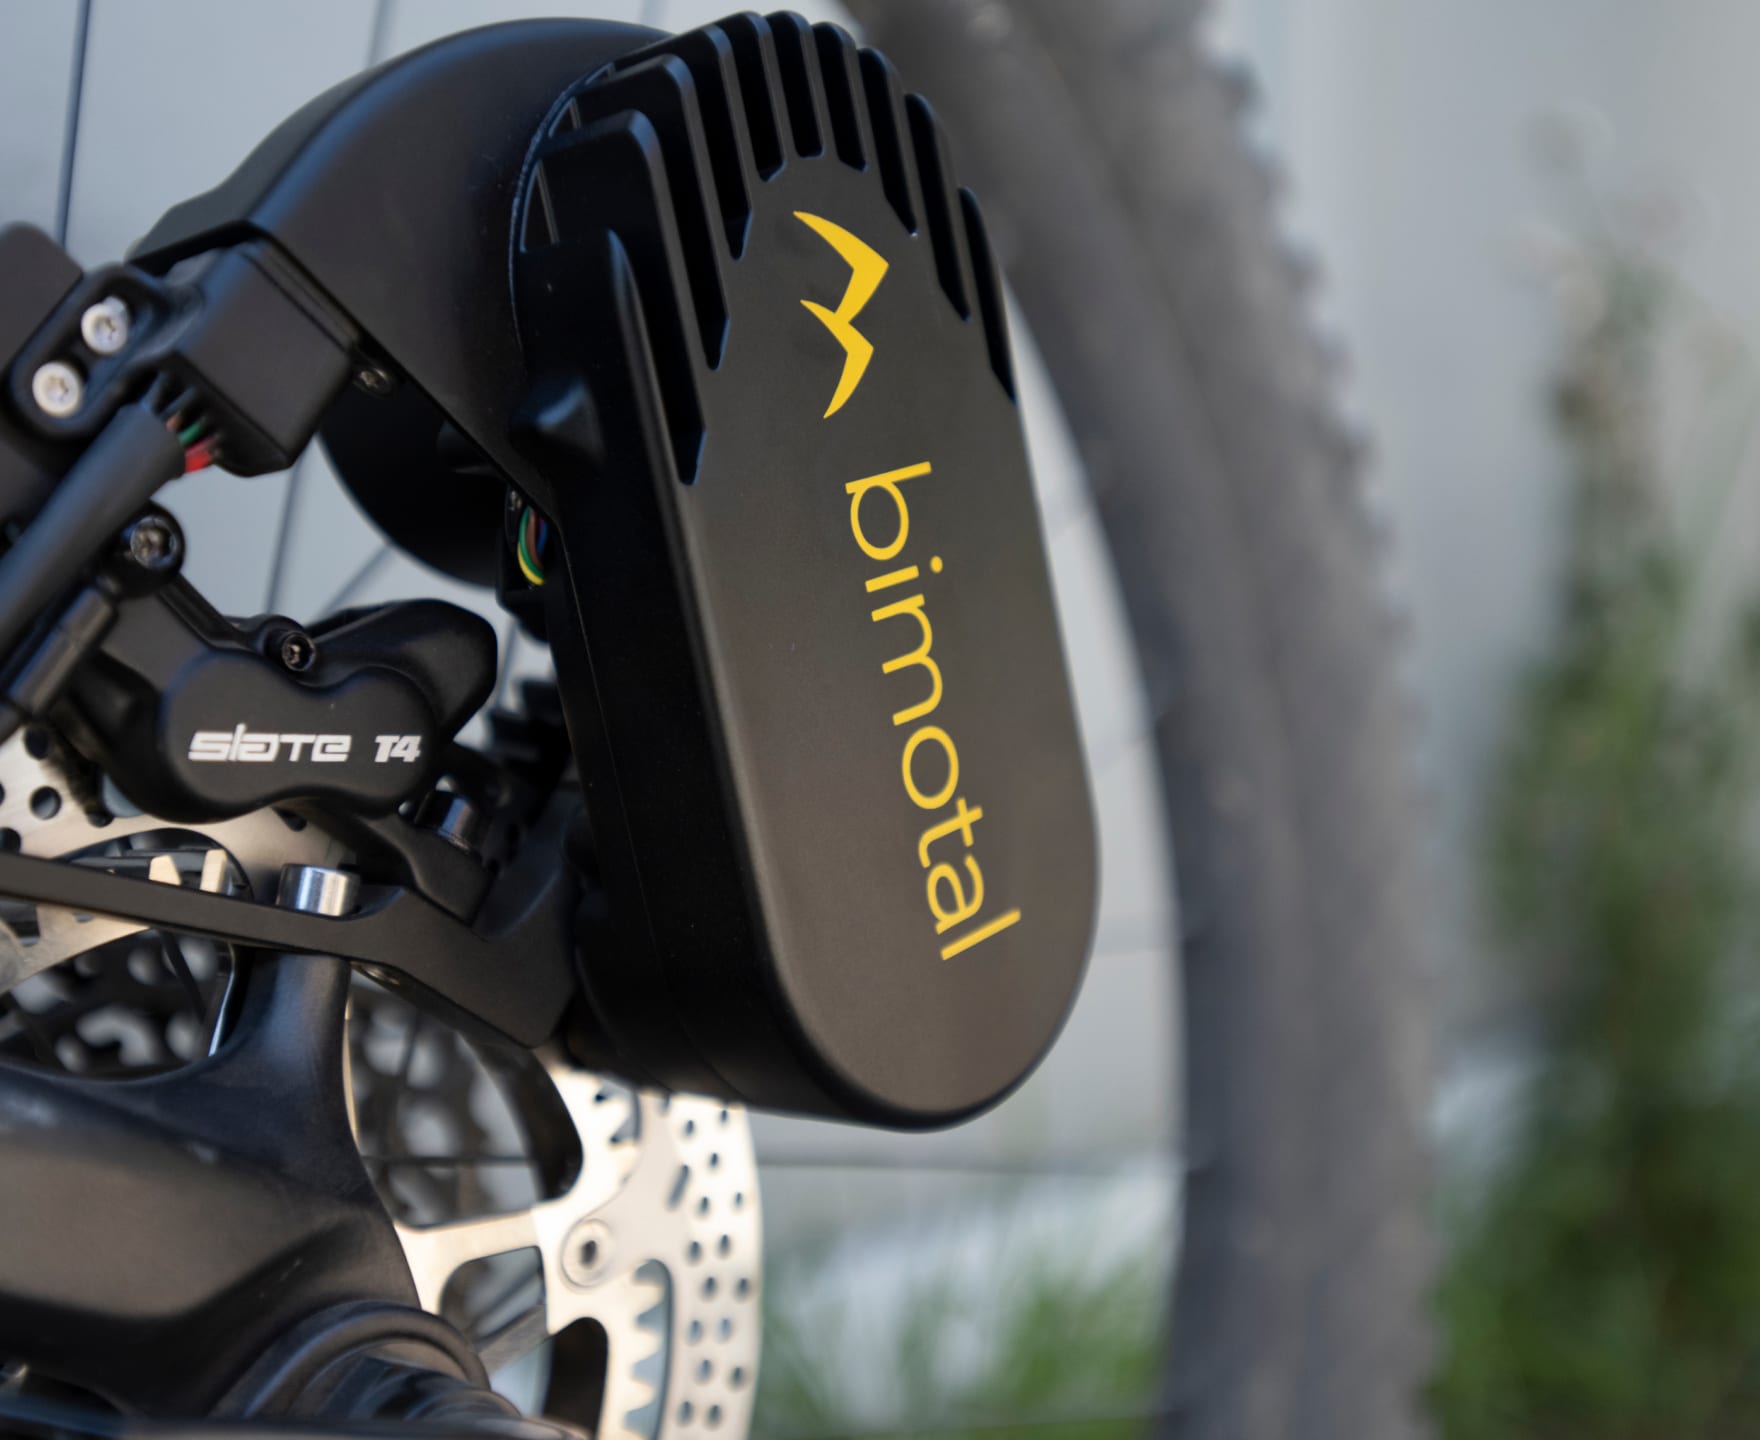 Bimotal Is Set to Hijack the E-bike World With Their Elevate